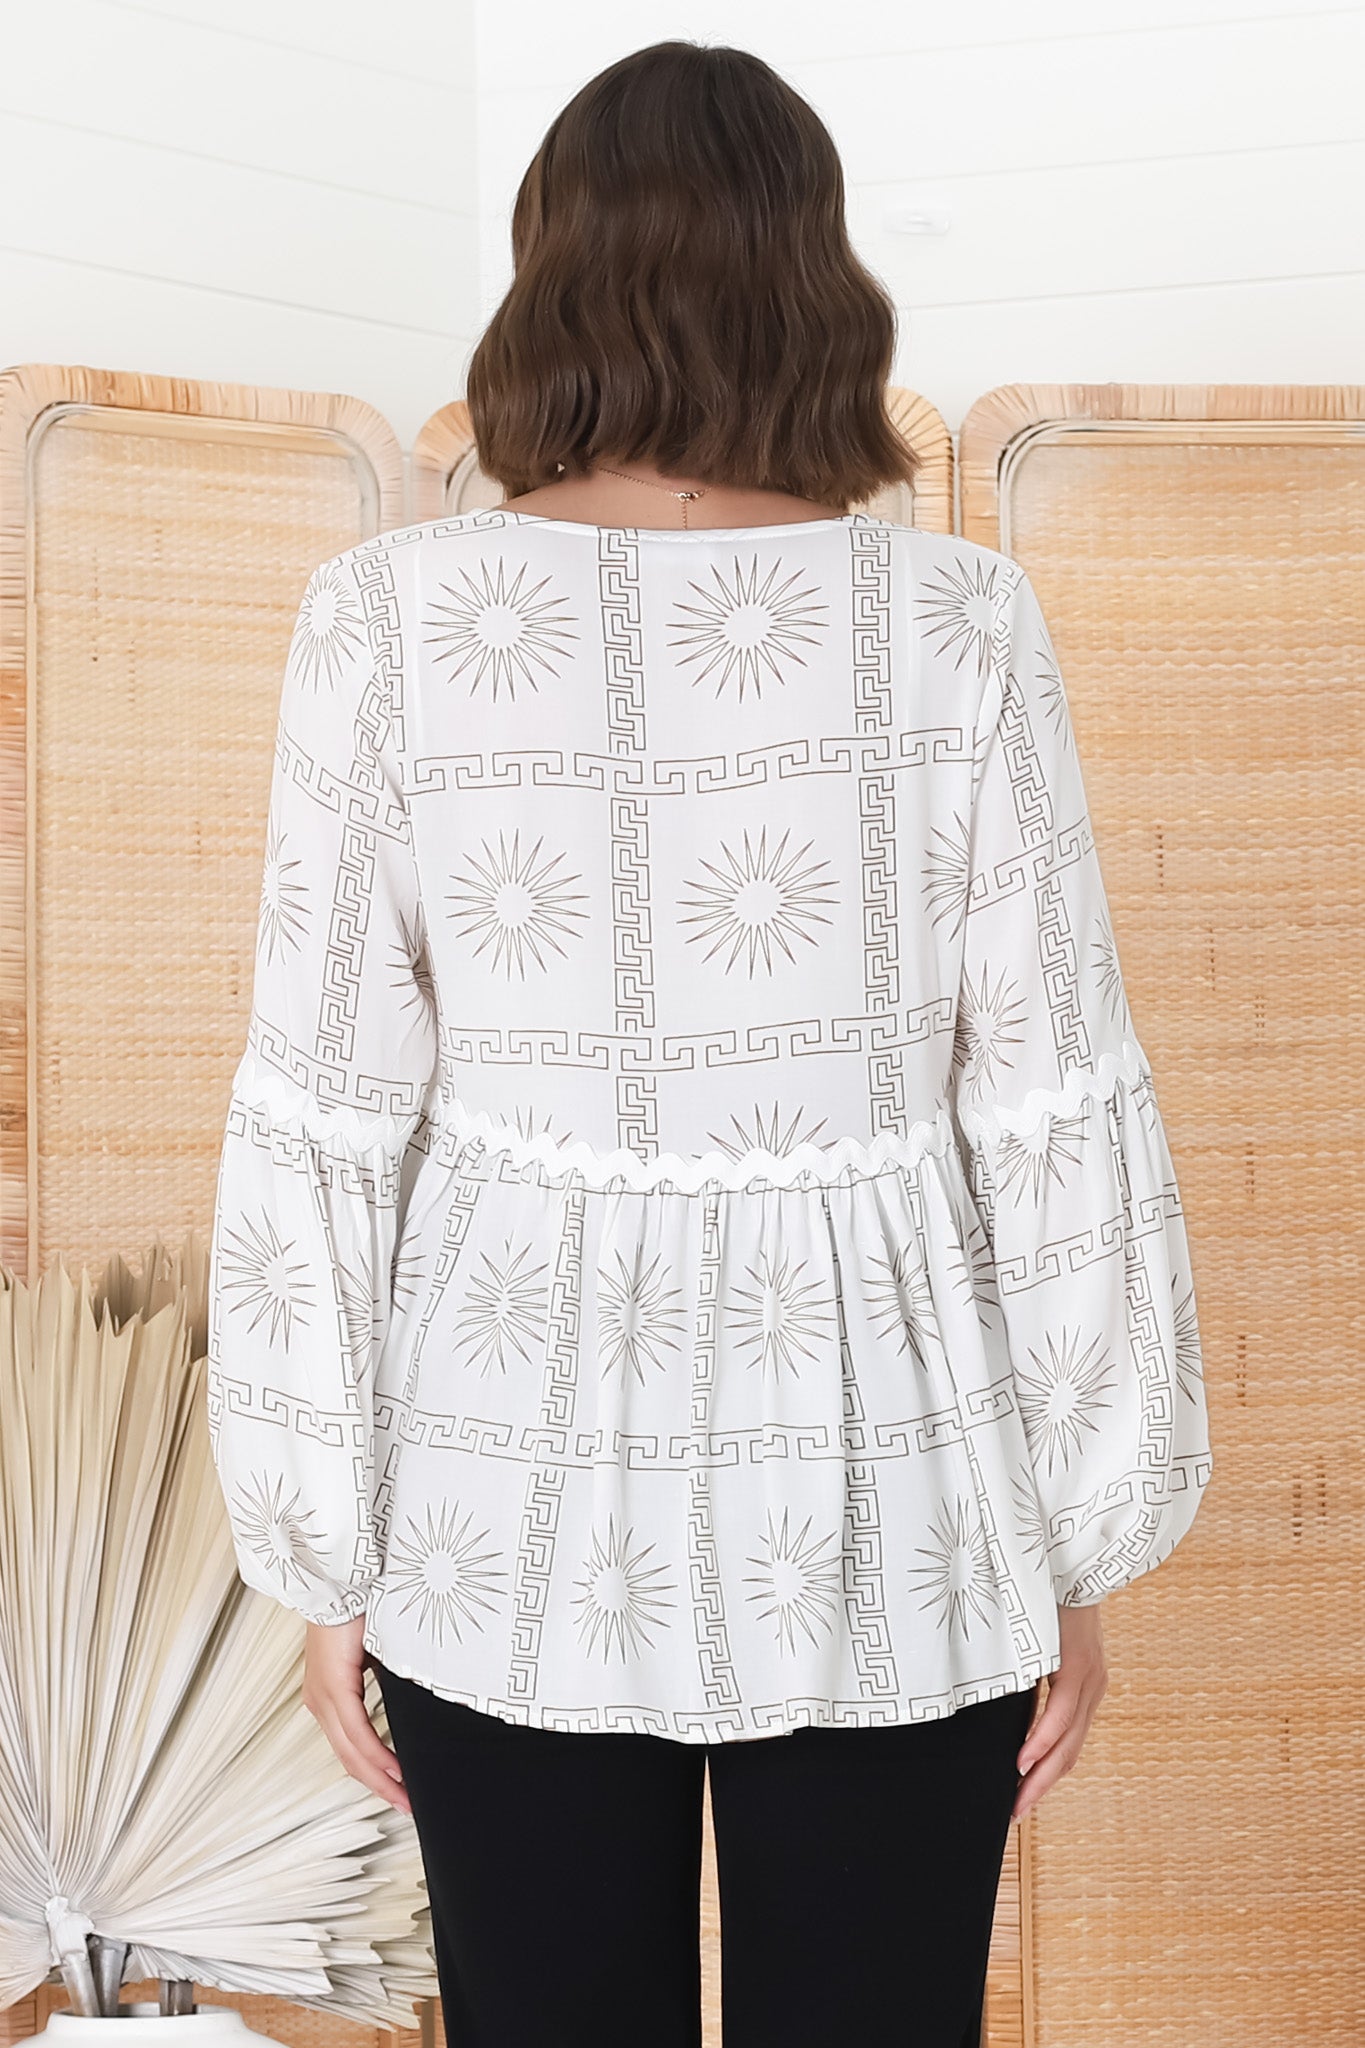 Hills Blouse - Buttoned Bodice Rick Rack Detail Smock Blouse in Astra Print White